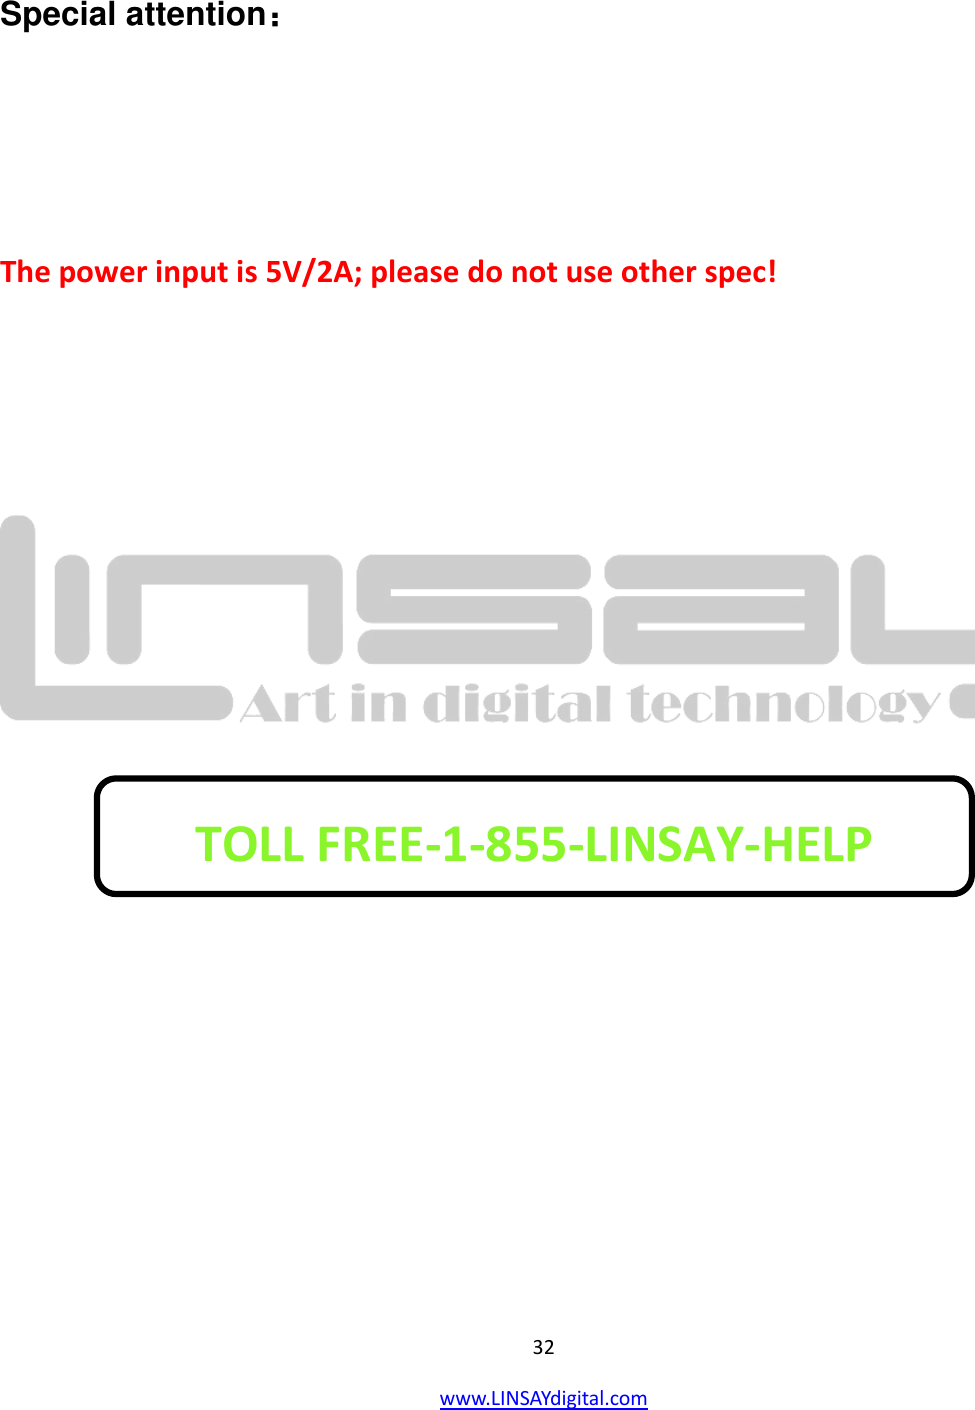  32 www.LINSAYdigital.com    Special attention：   The power input is 5V/2A; please do not use other spec!           TOLL FREE-1-855-LINSAY-HELP  